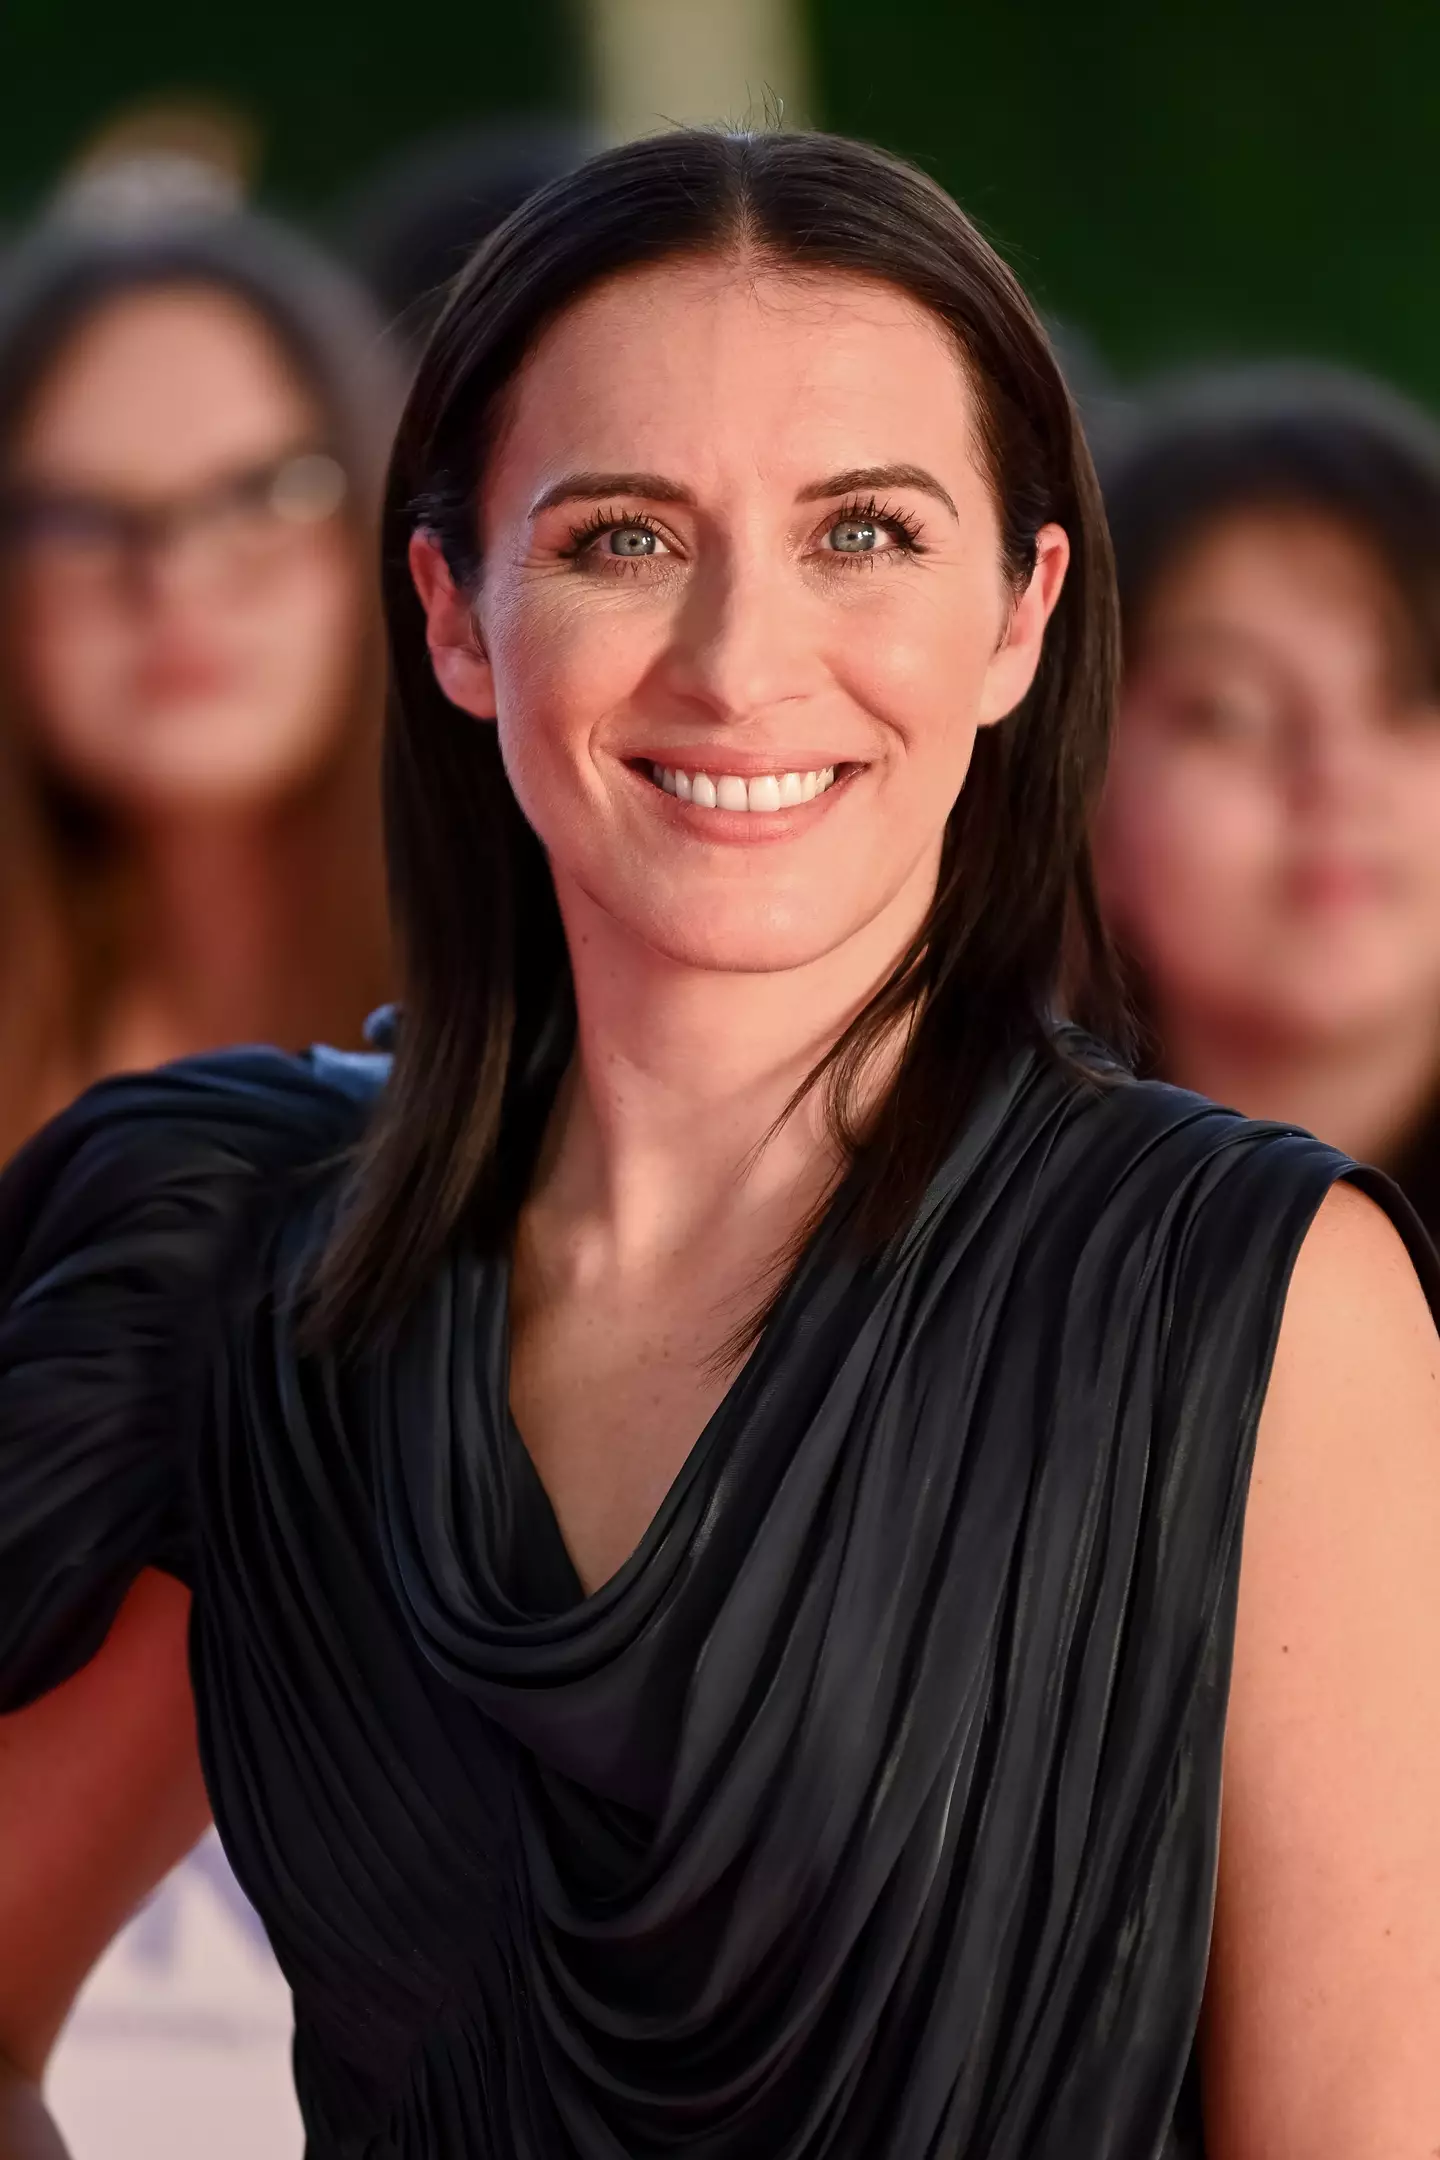 The idea was developed by actor Vicky McClure.